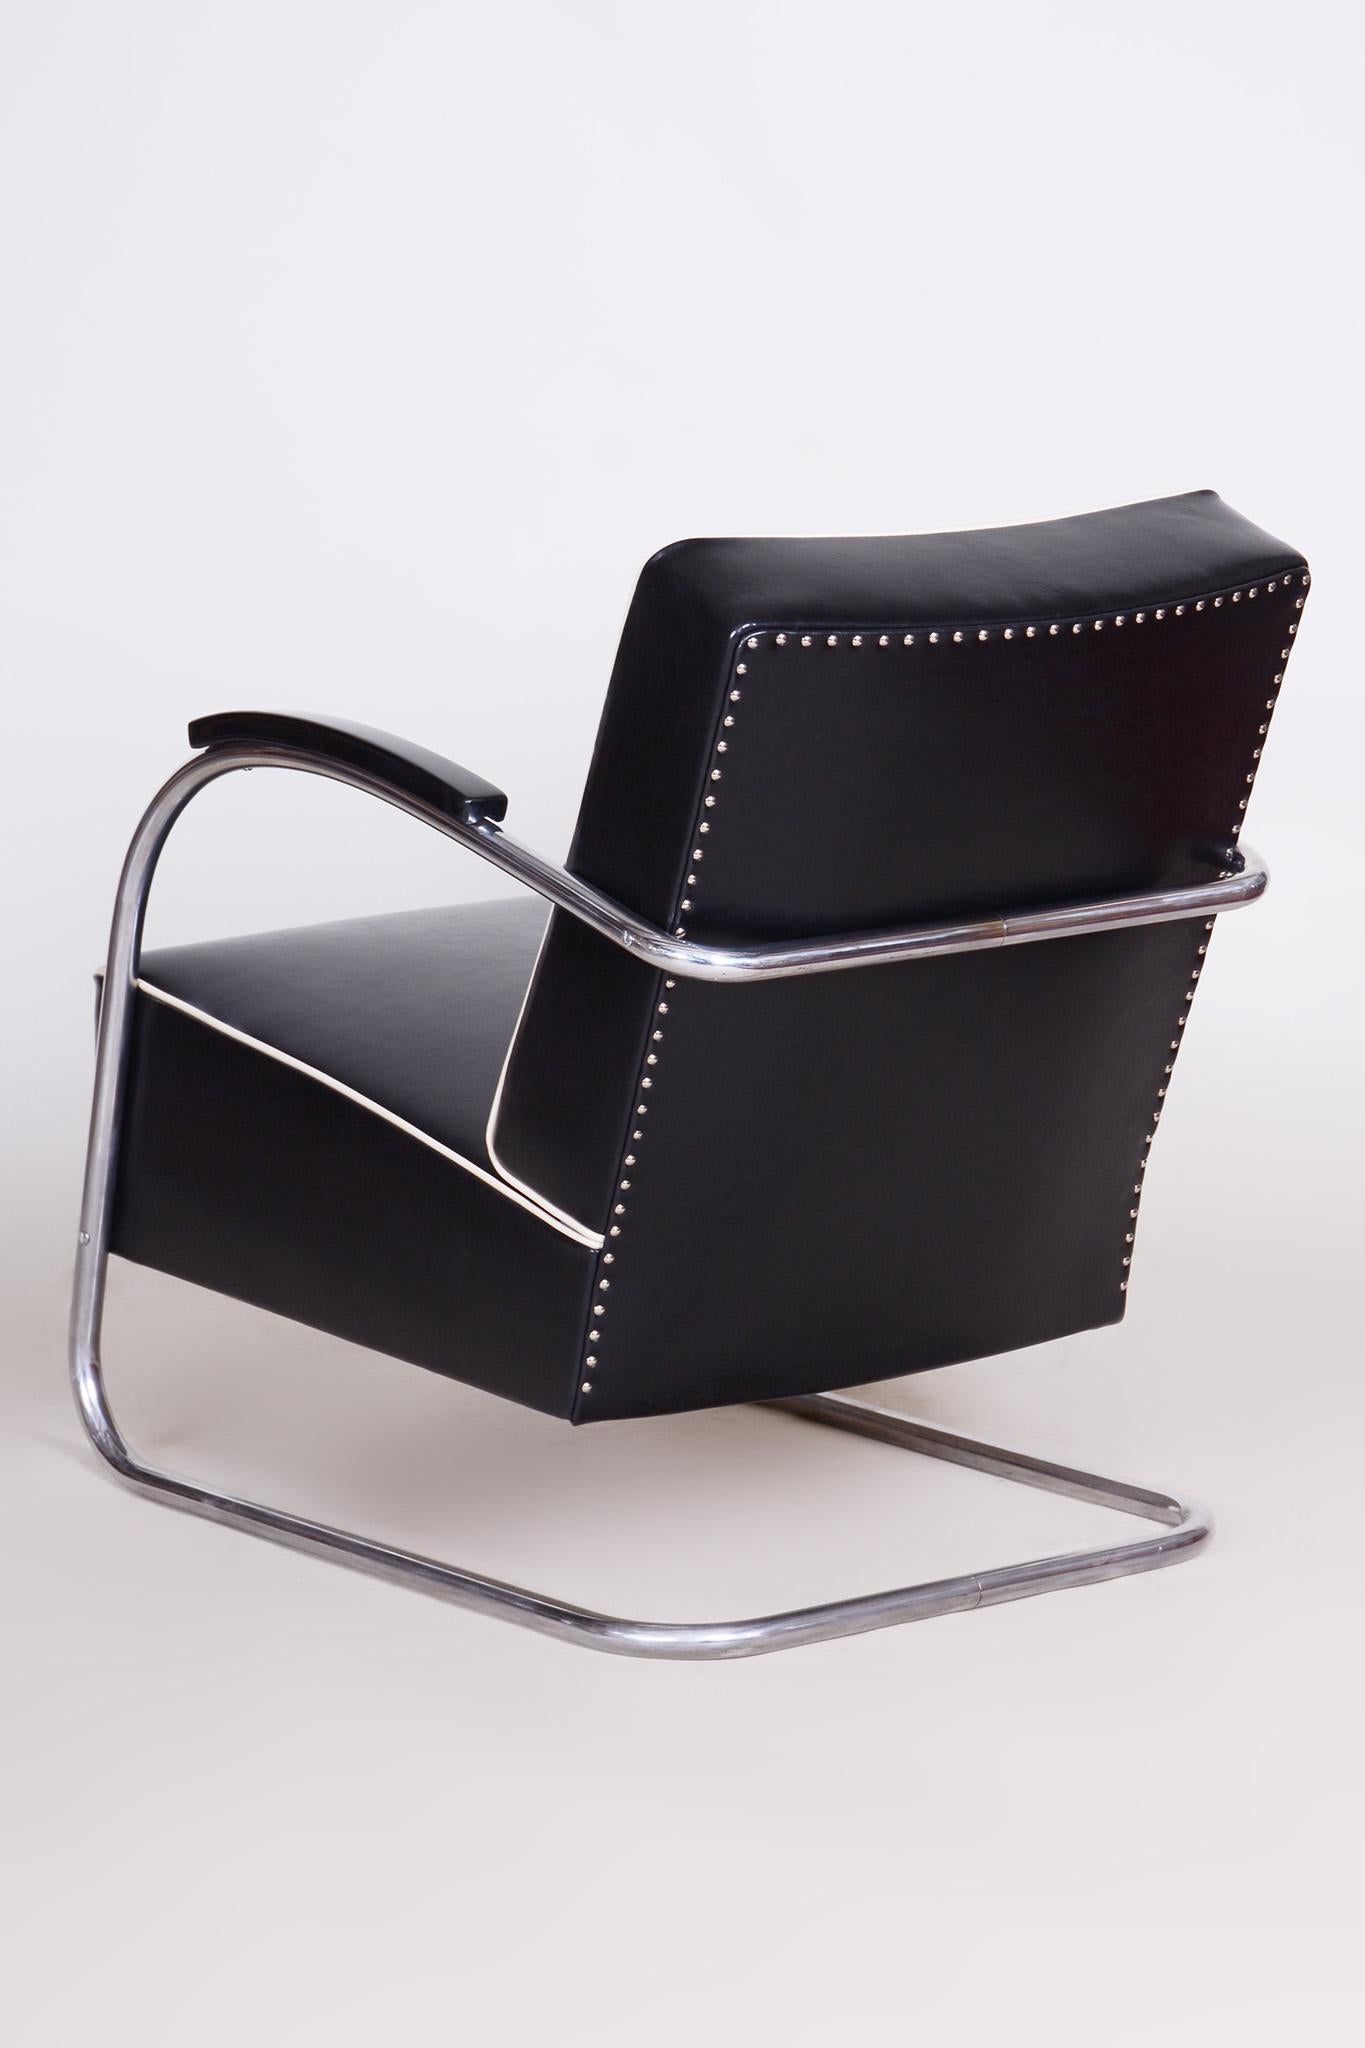 Black Leather Armchair, 1930s Czechia, Made by Mucke-Melder and Fully Restored For Sale 6